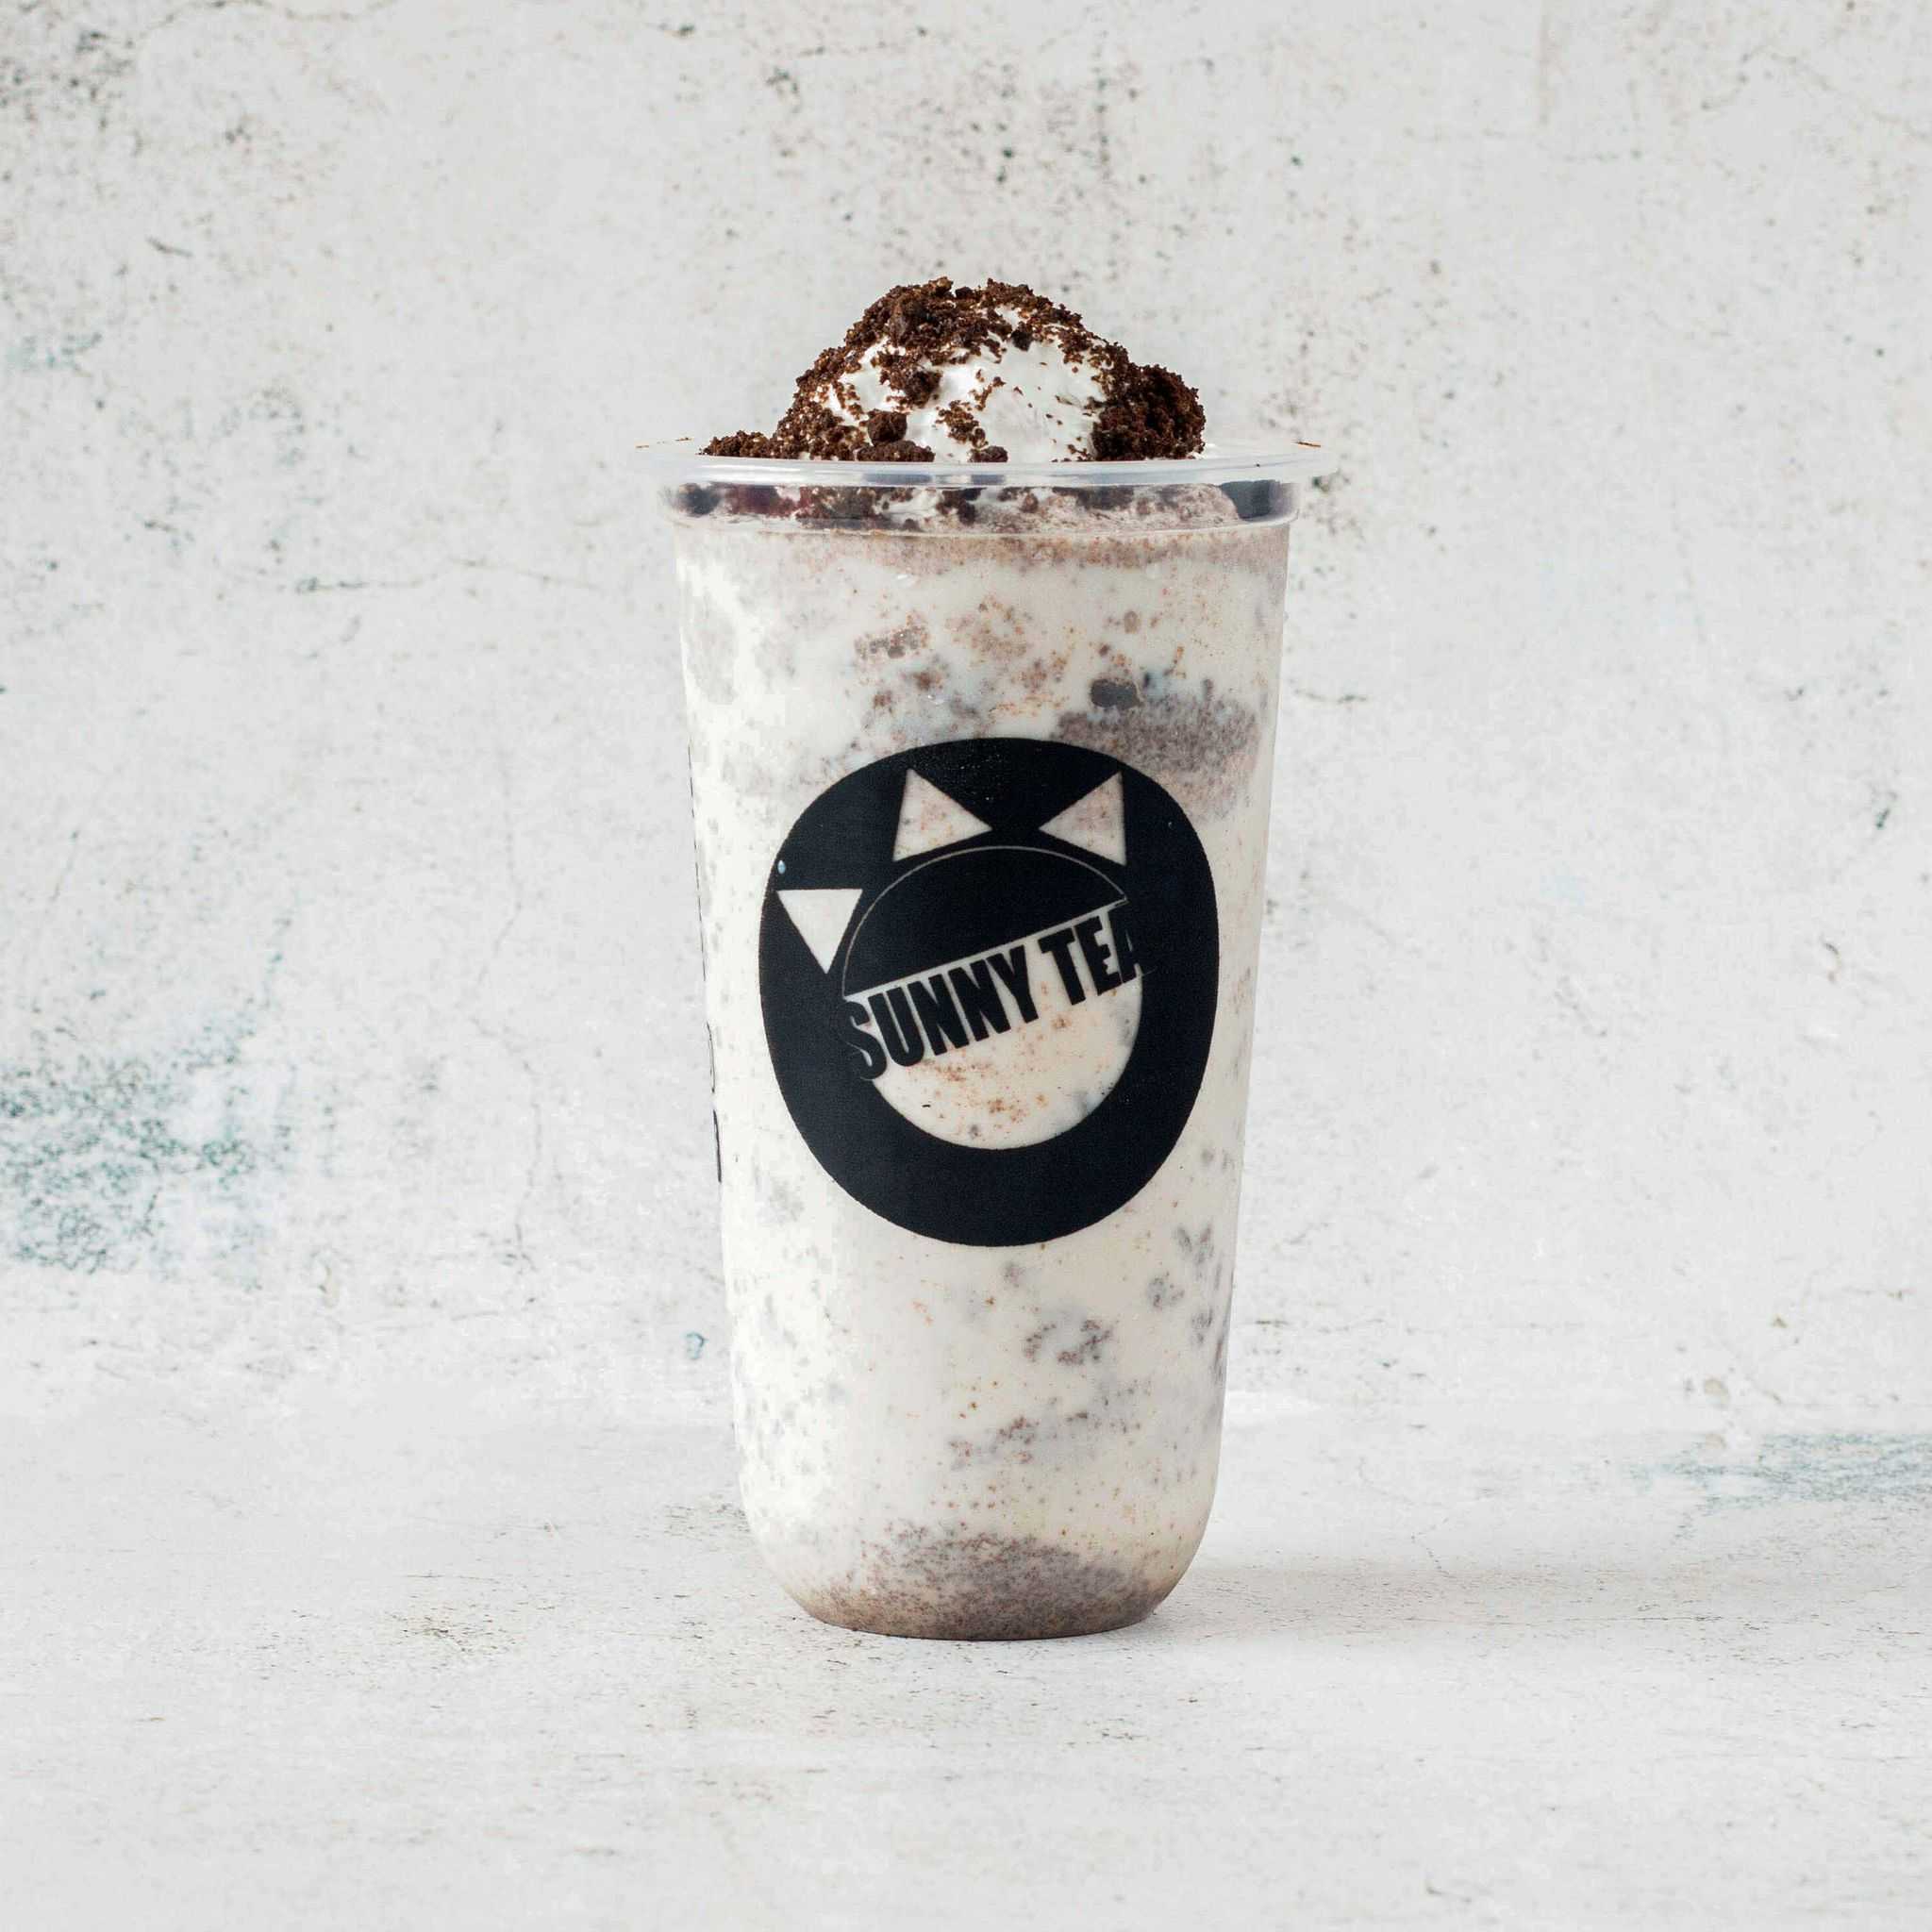 Cookies and Cream frappe